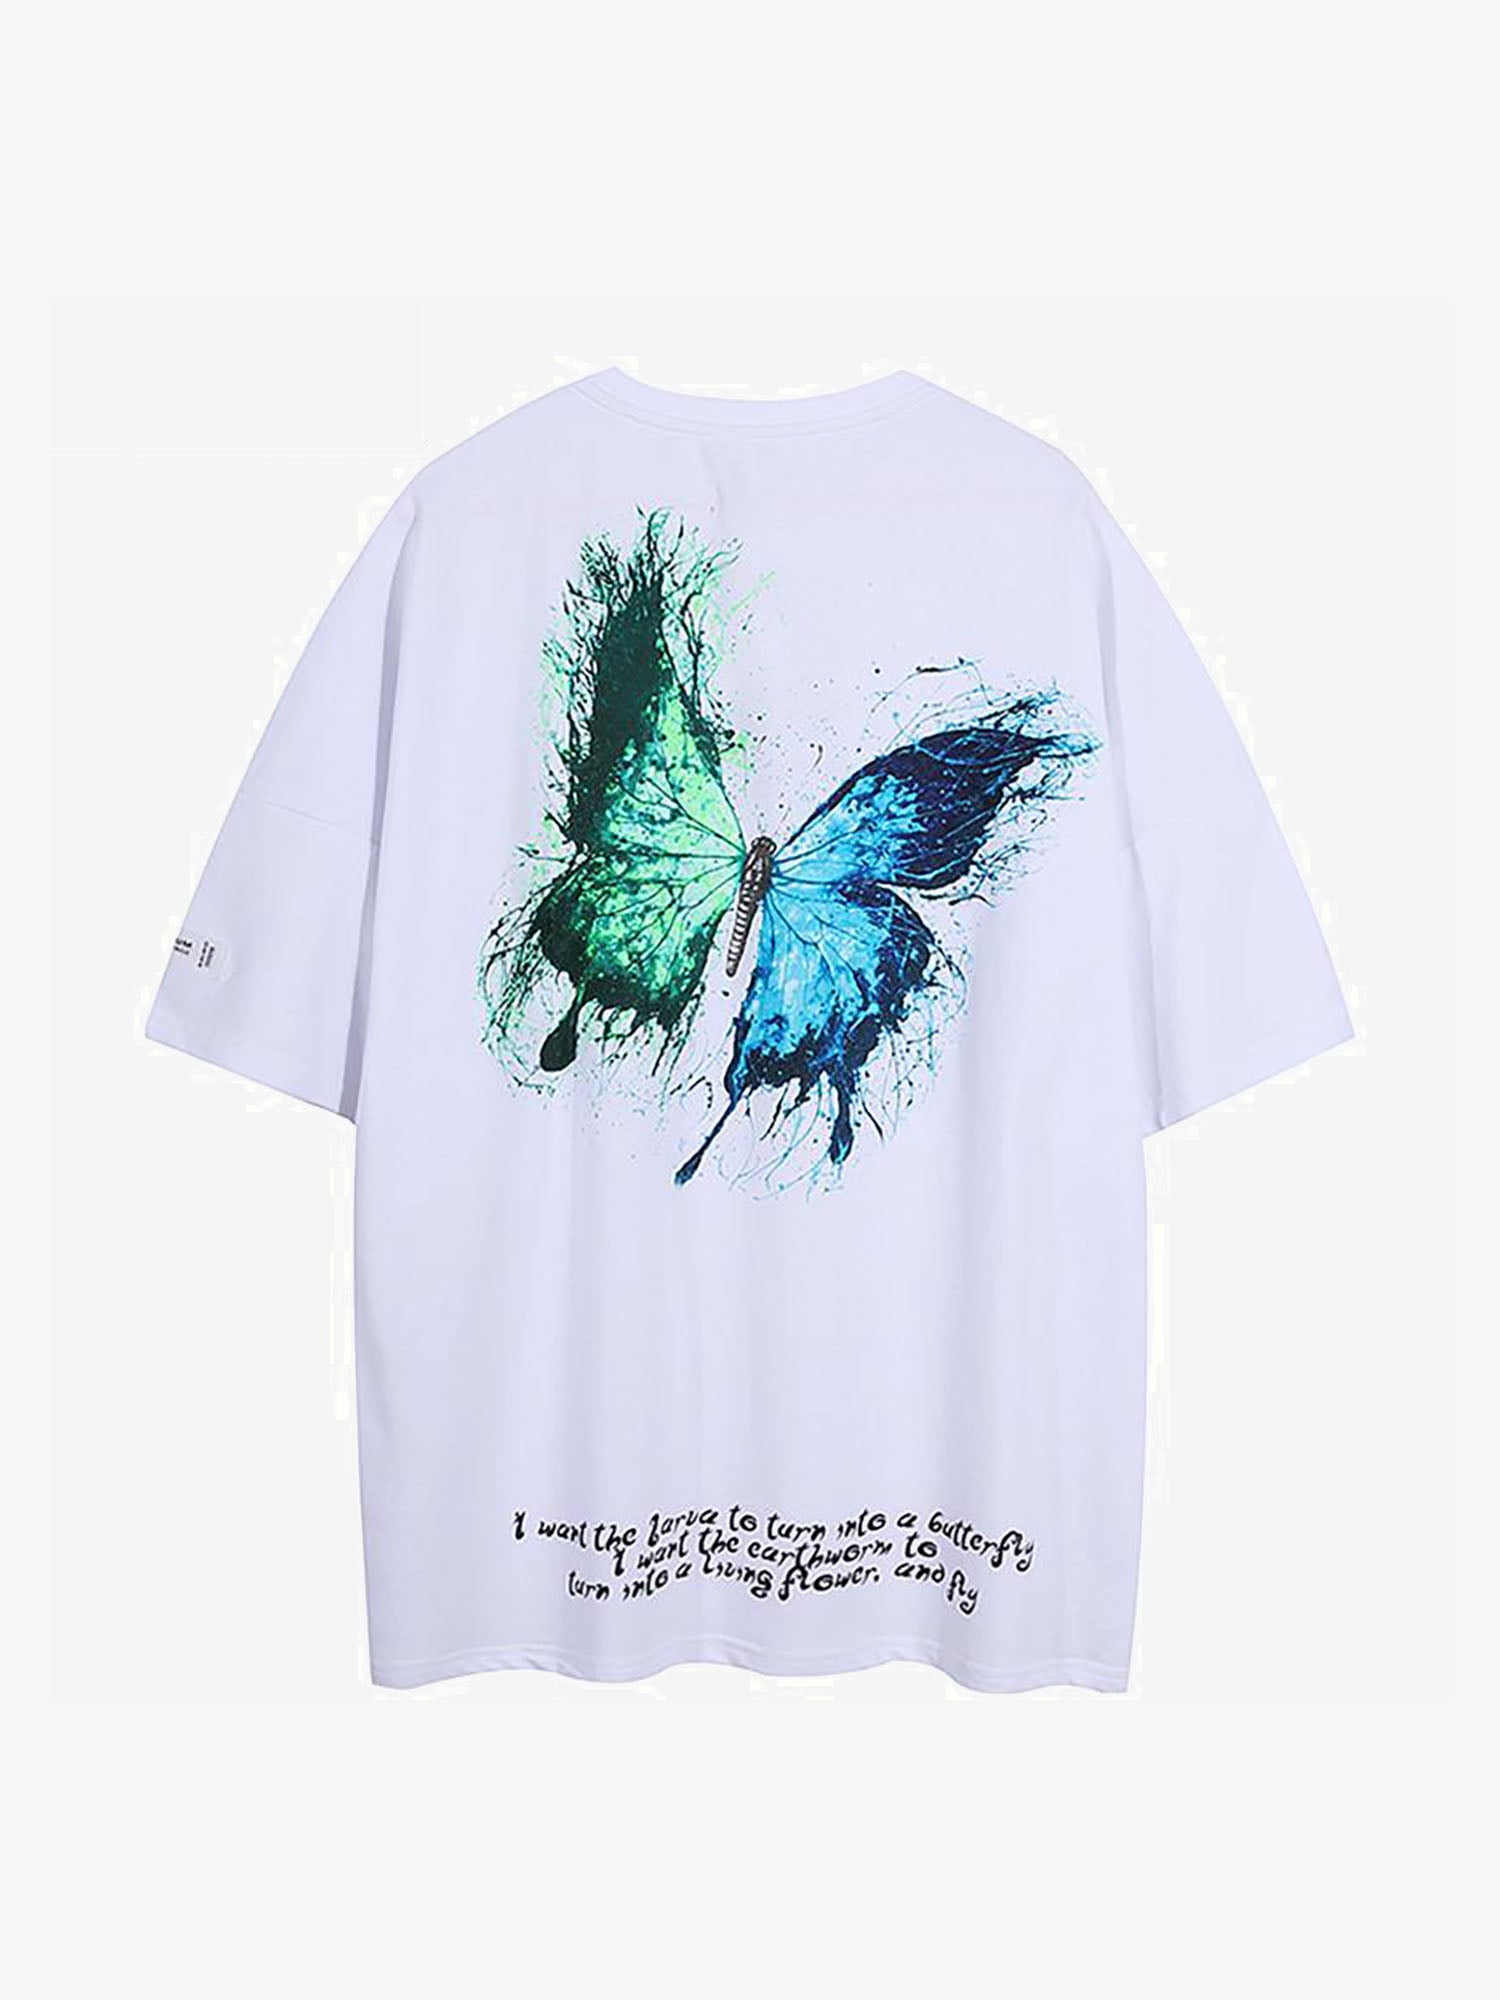 JUSTNOTAG Patchwork Butterfly Letter Print Short Sleeve Tee